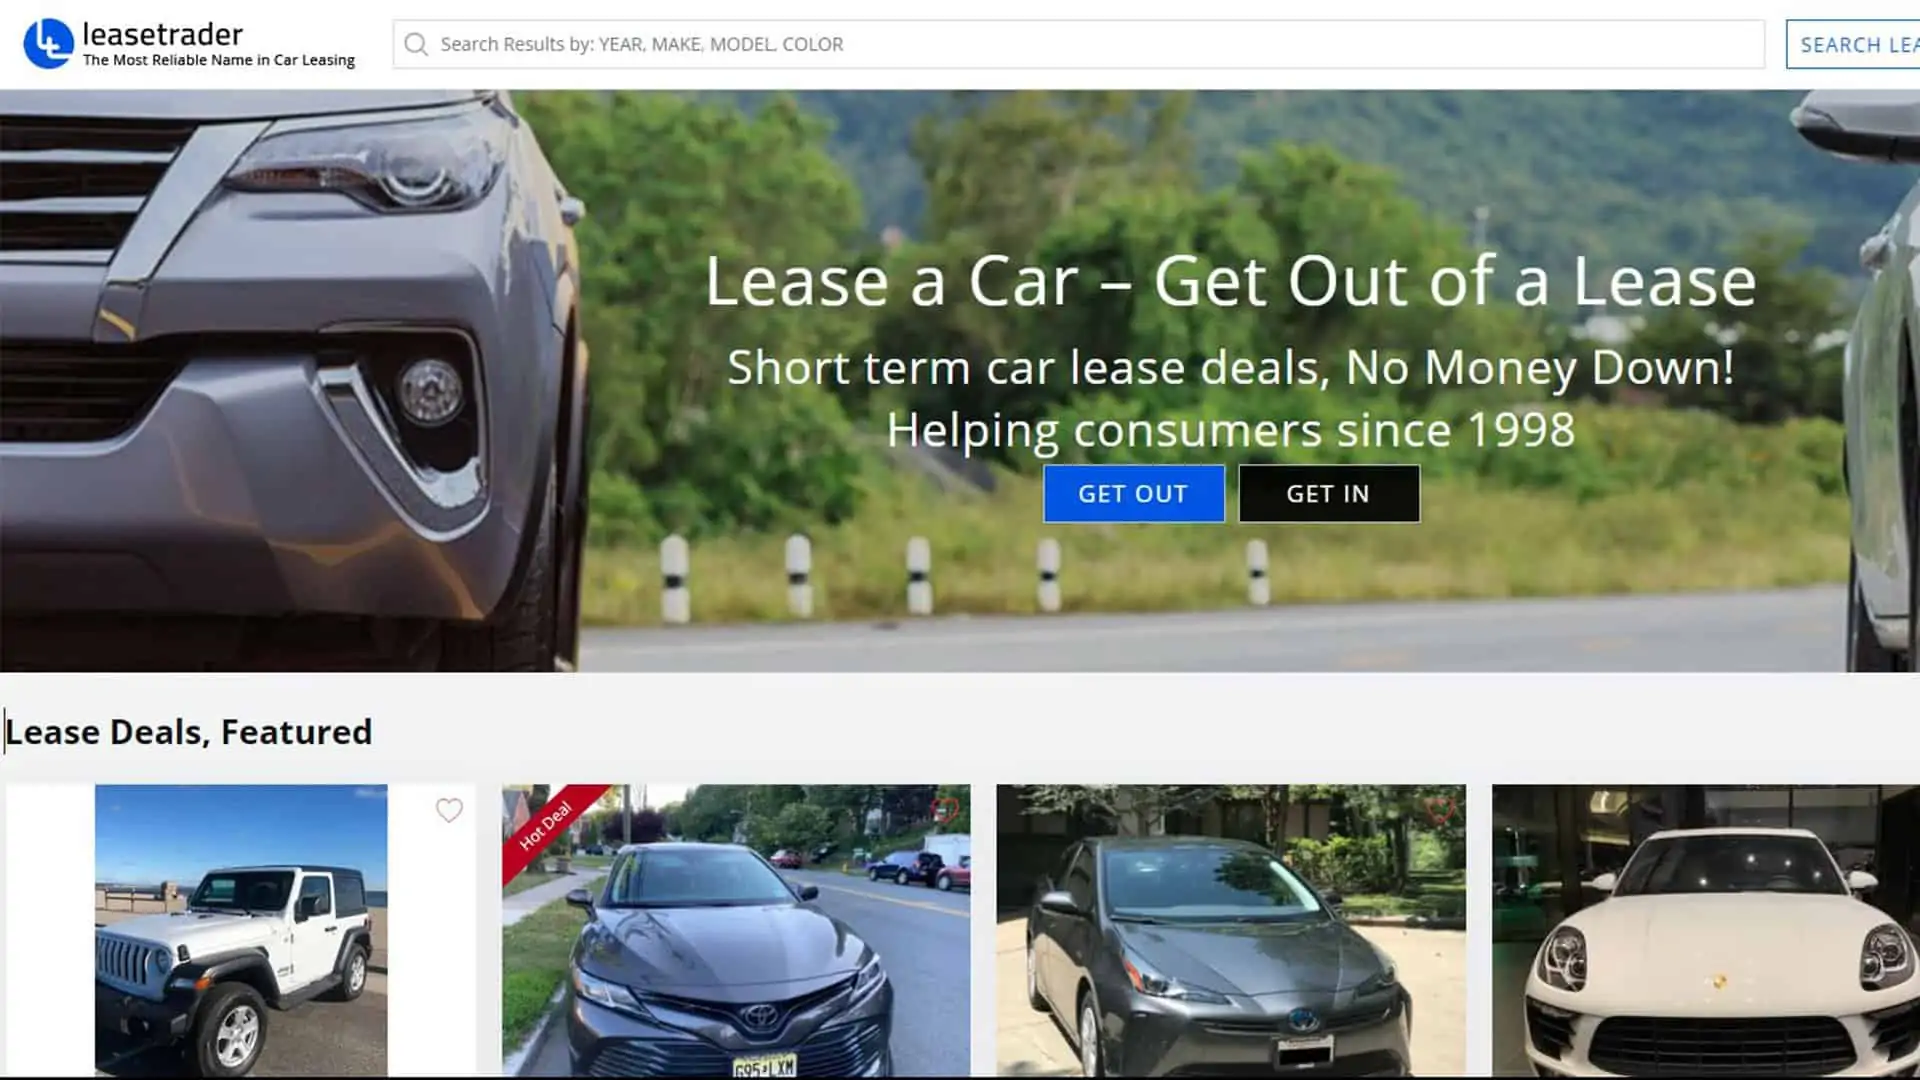 leasetrader screenshot - taking over a car lease post